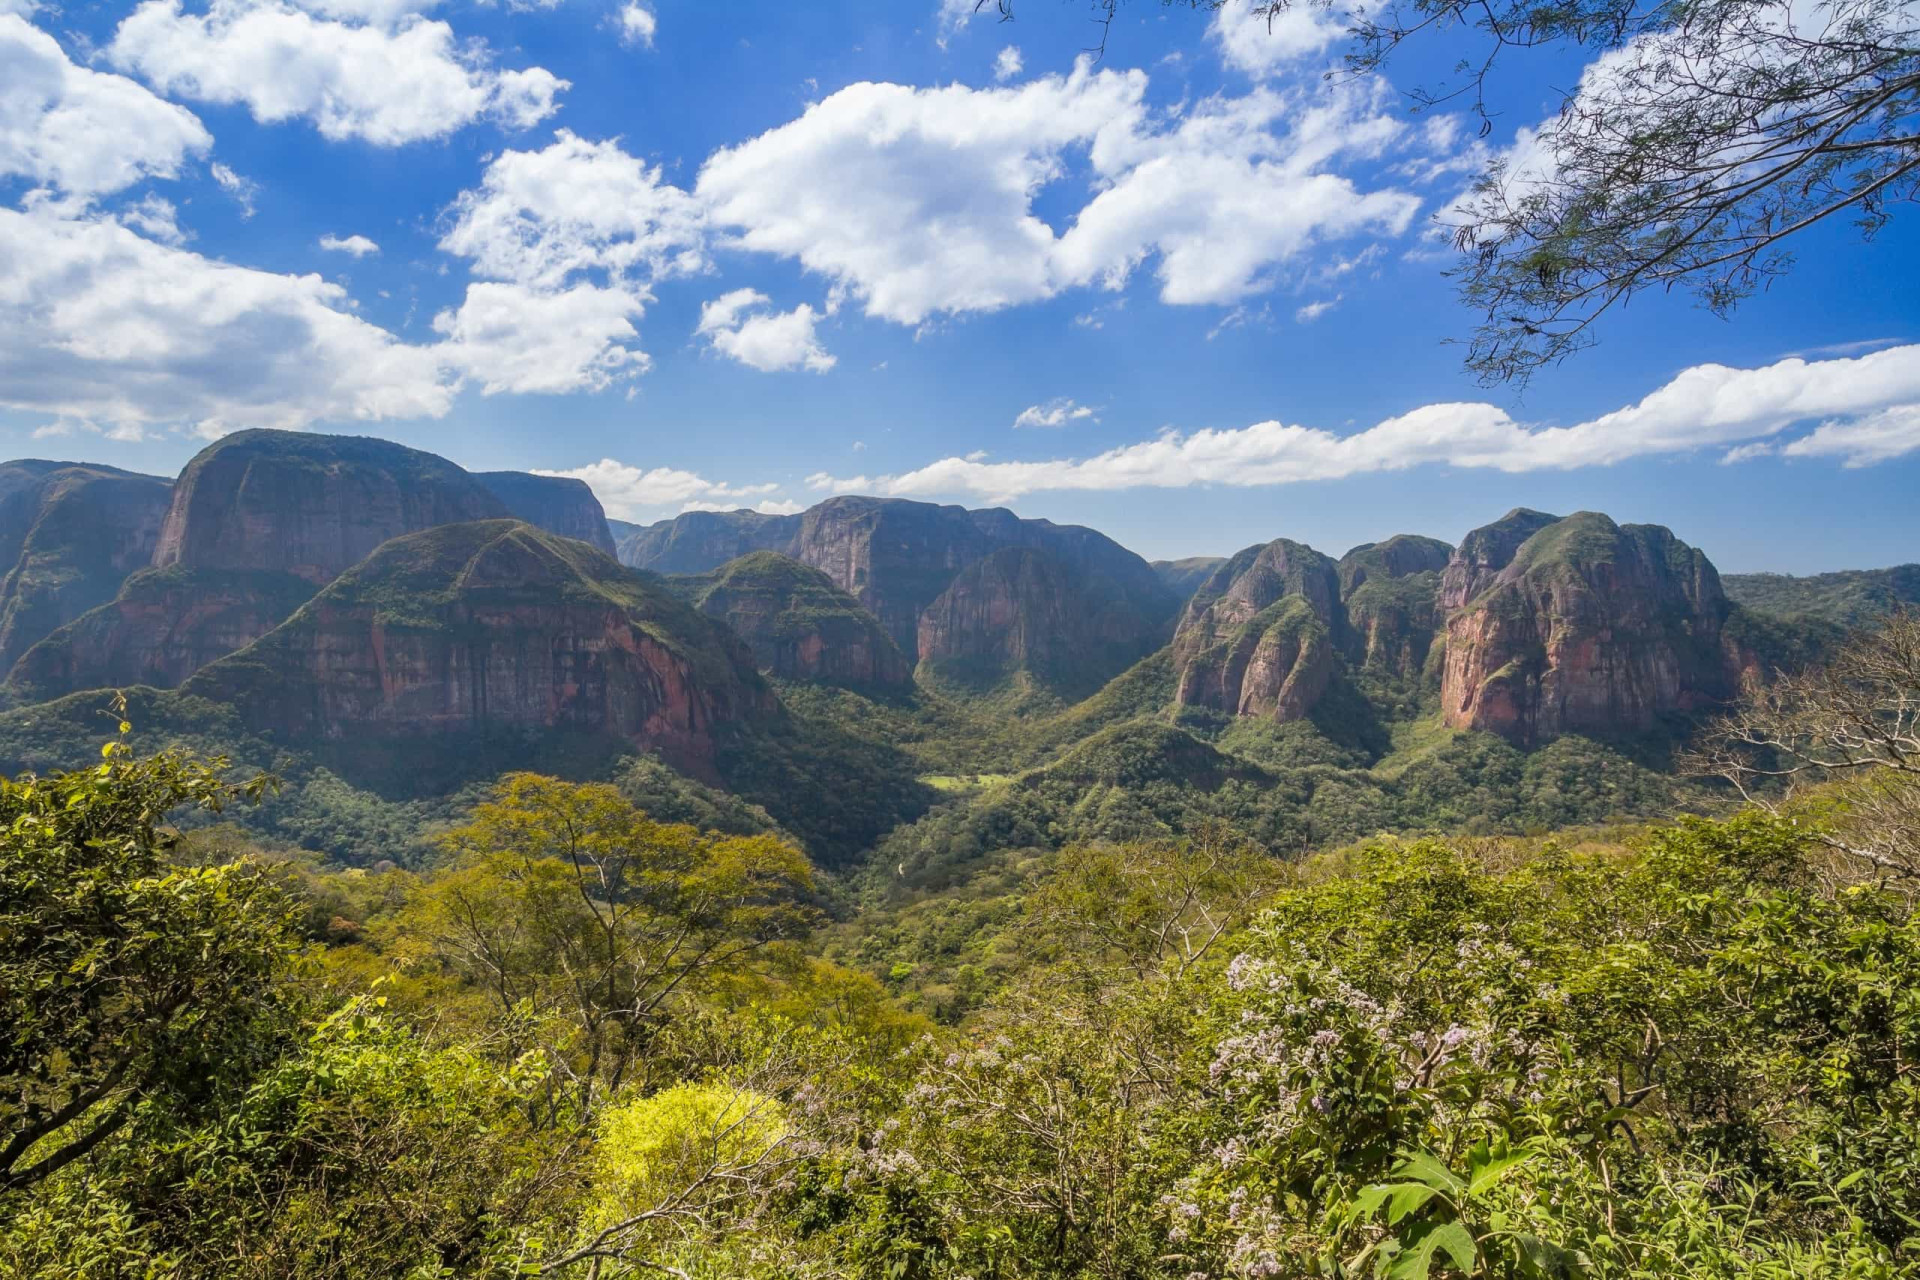 <p>Location: Santa Cruz Department<br>Criteria: Natural<br>Year established: 2000<br>Description: Situated where the Amazonian rain forests and the dry forest and savannas of cerrado (upland) meet, the park is listed for its almost pristine vegetation. </p><p><a href="https://www.msn.com/en-us/community/channel/vid-7xx8mnucu55yw63we9va2gwr7uihbxwc68fxqp25x6tg4ftibpra?cvid=94631541bc0f4f89bfd59158d696ad7e">Follow us and access great exclusive content every day</a></p>